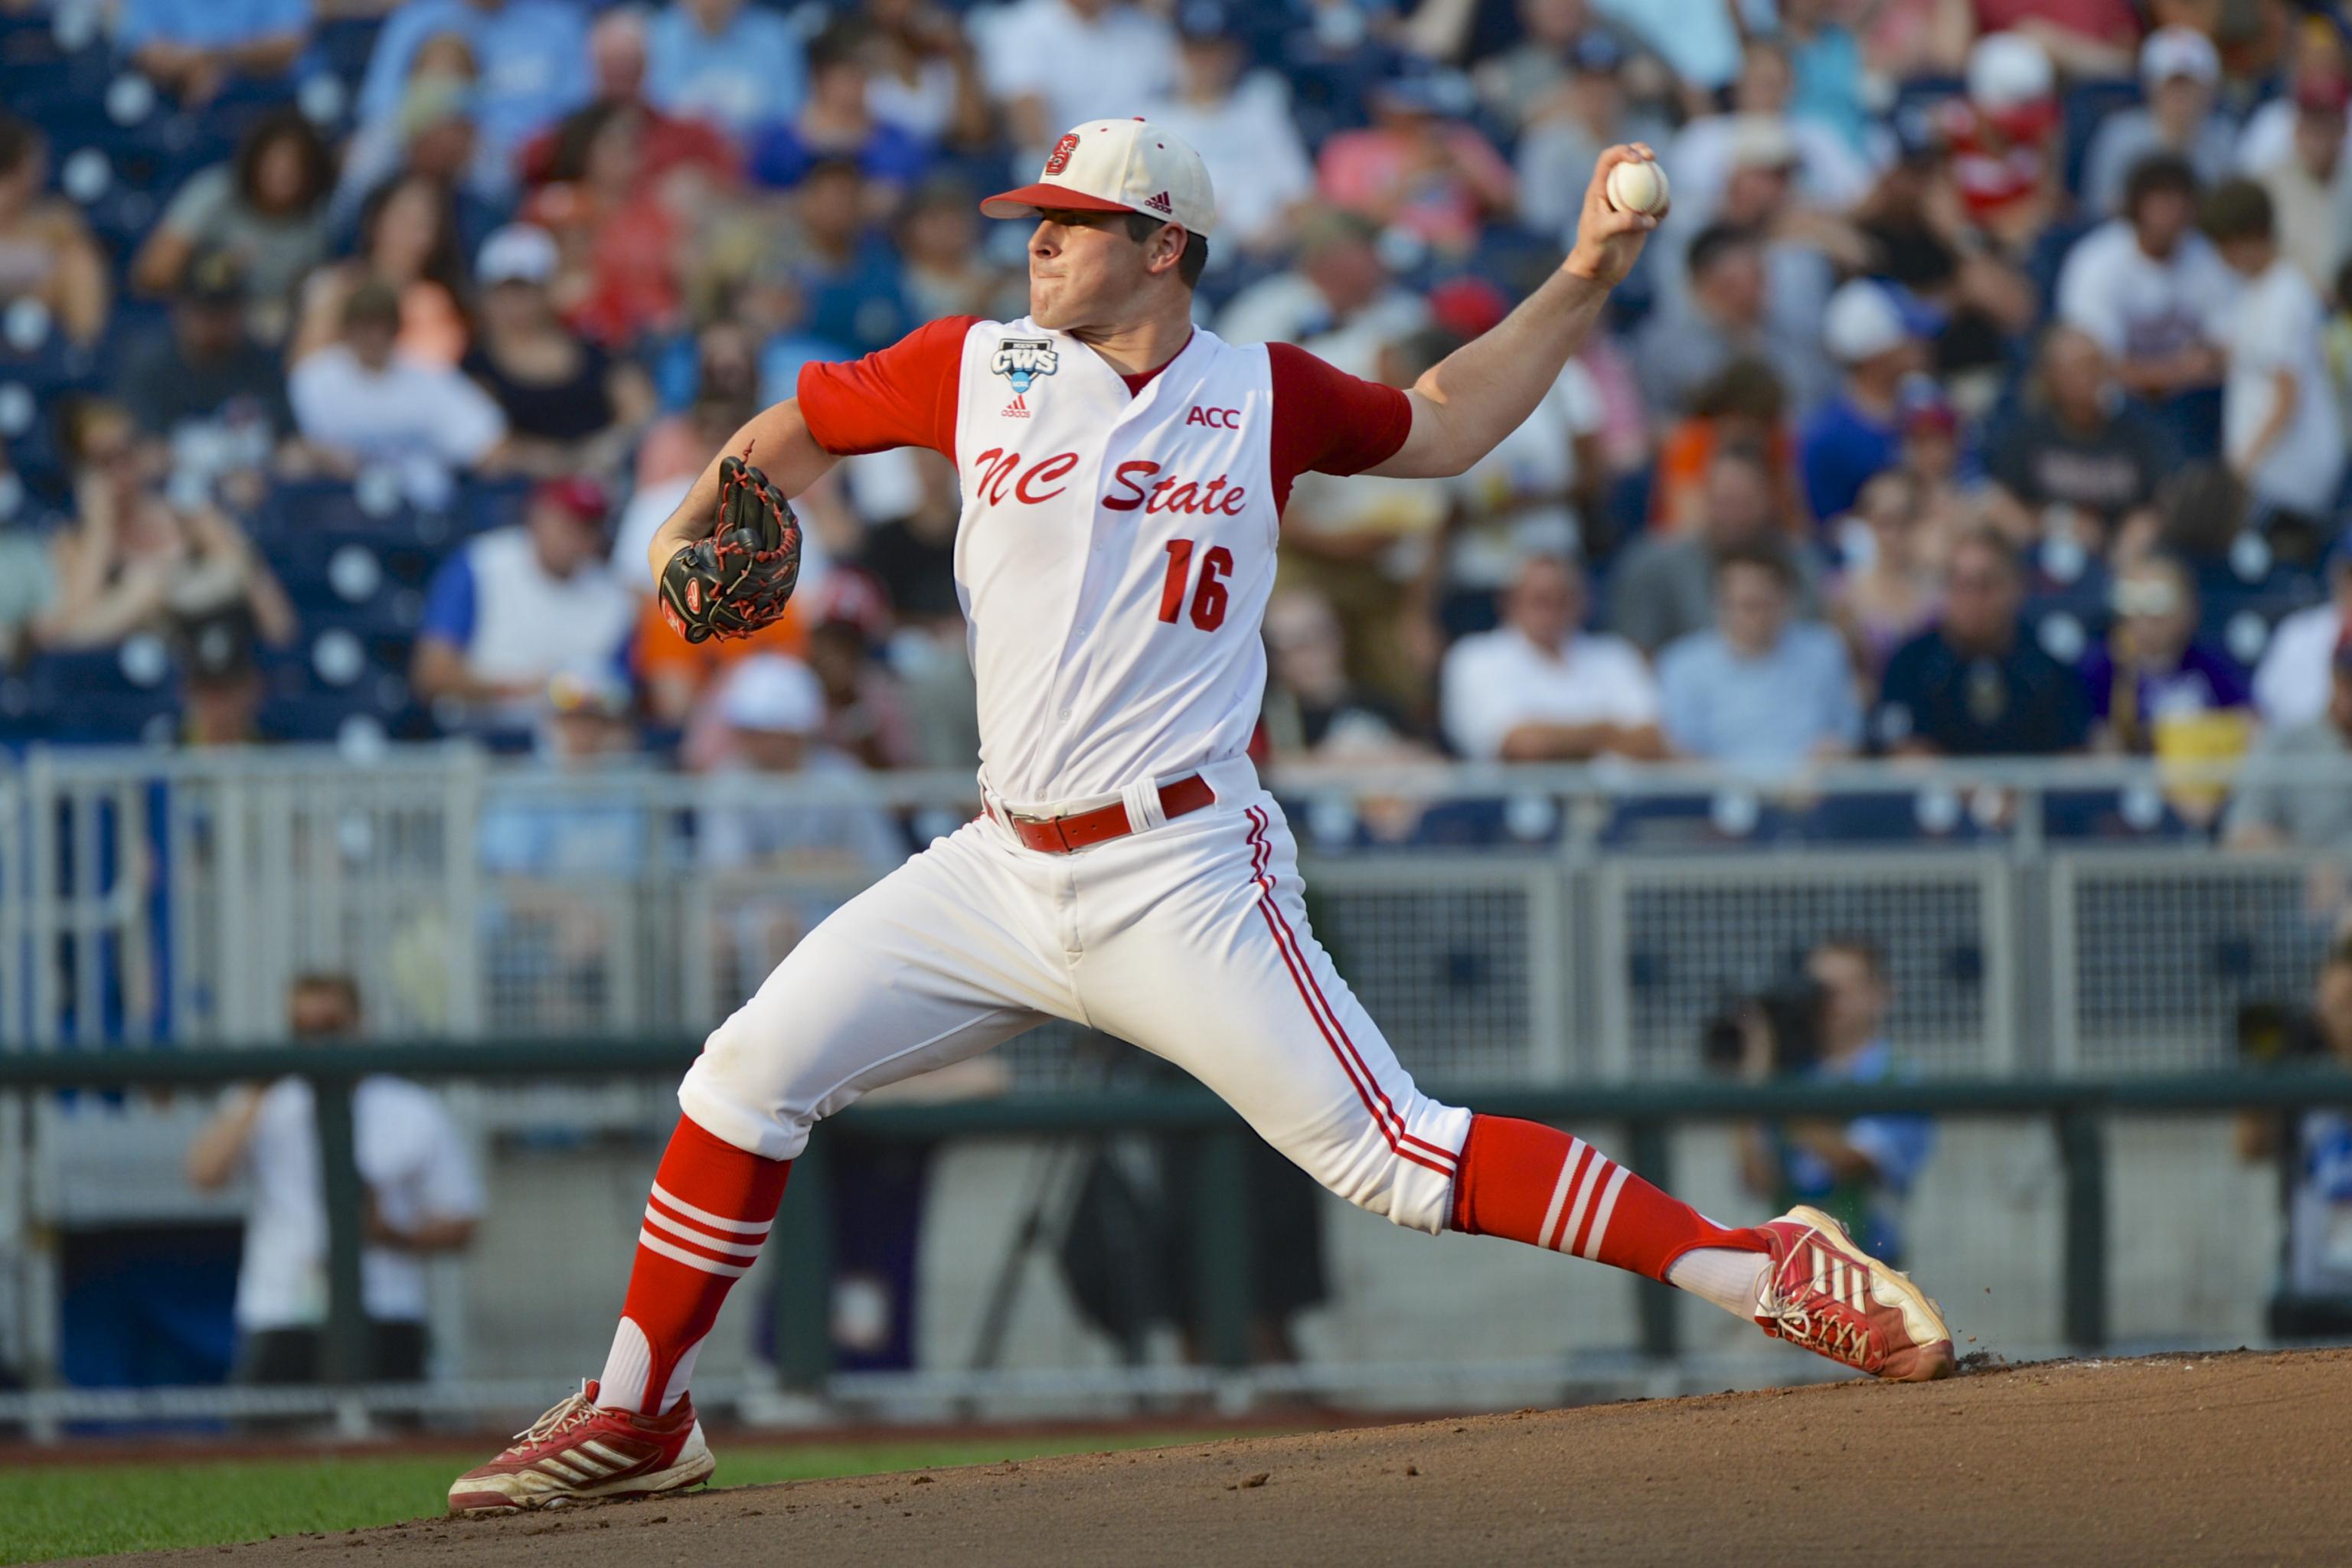 Strelow: N.C. State ace Carlos Rodon still projected as high draft